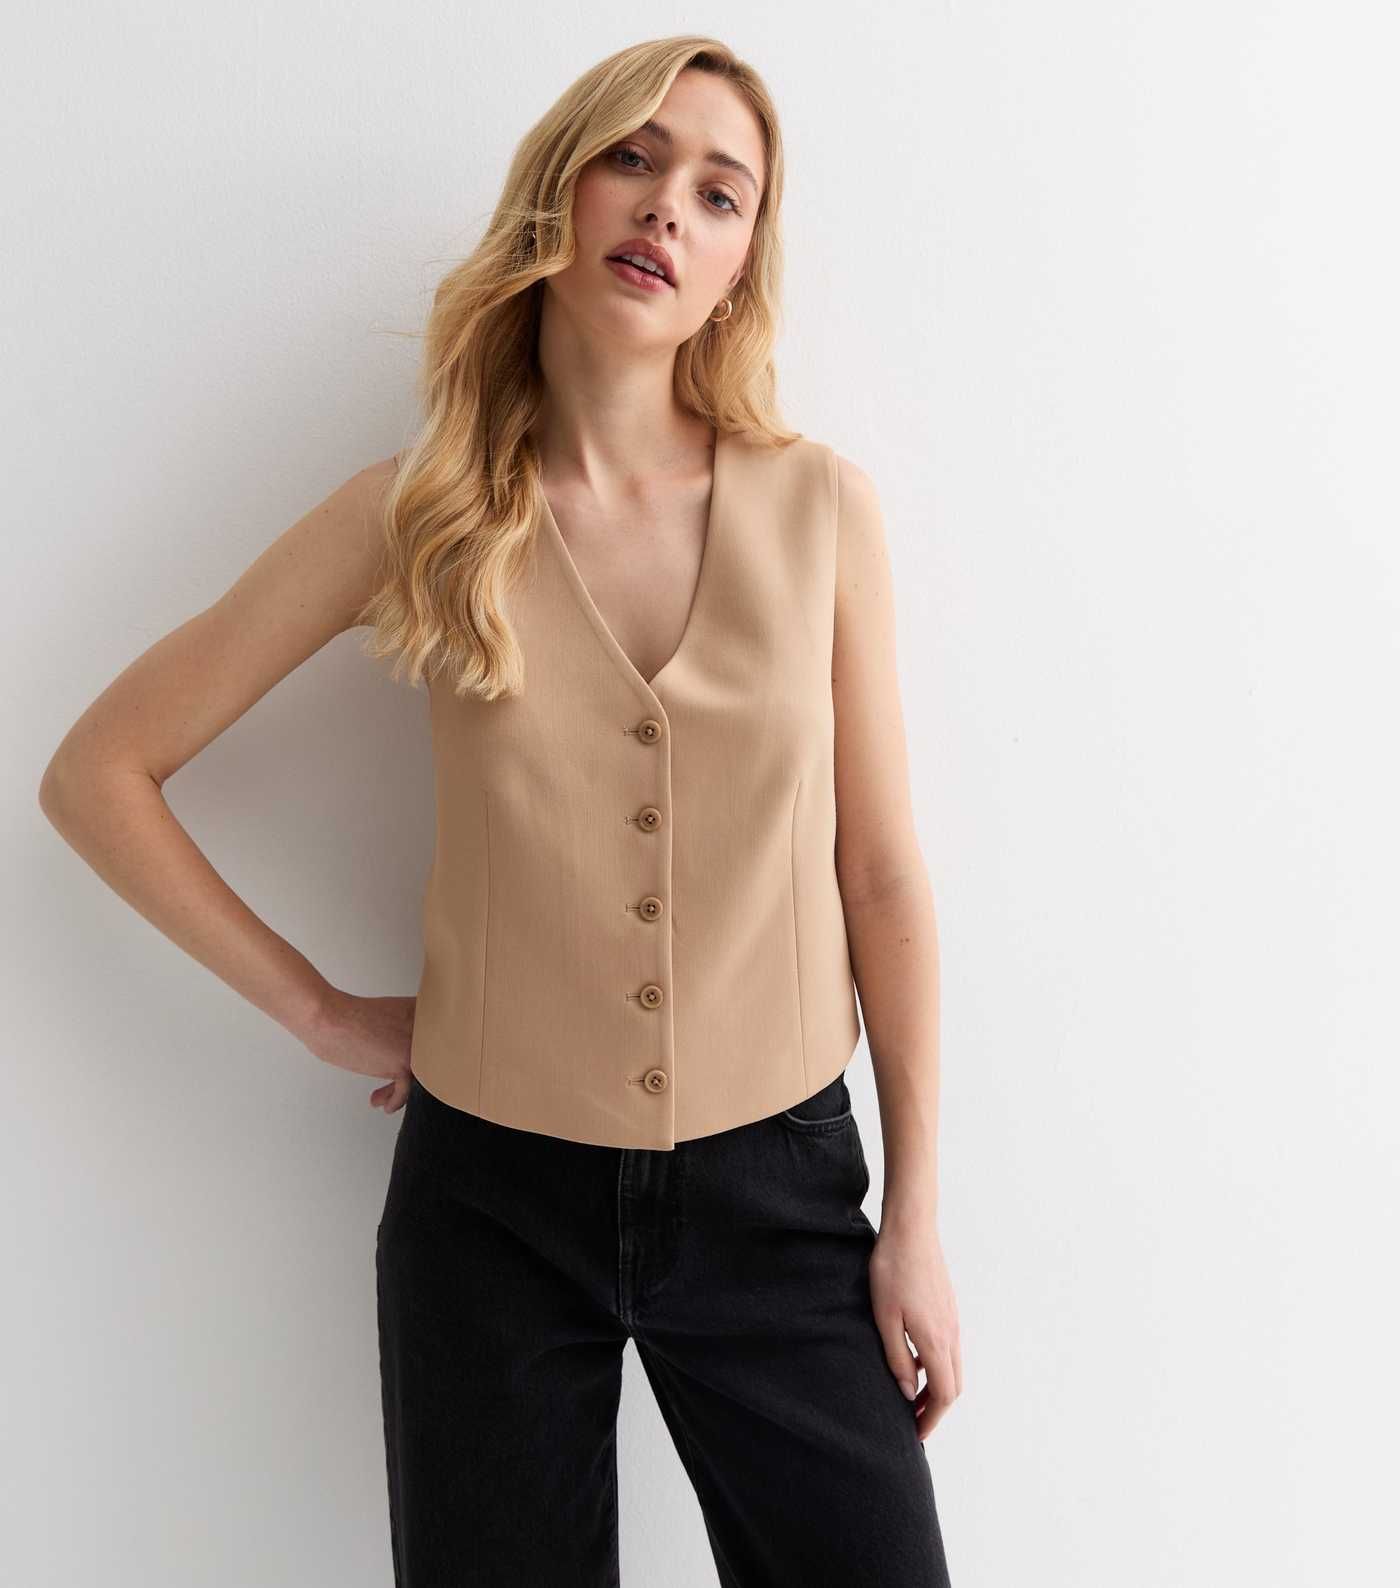 Stone Button Front Waistcoat
						
						Add to Saved Items
						Remove from Saved Items | New Look (UK)